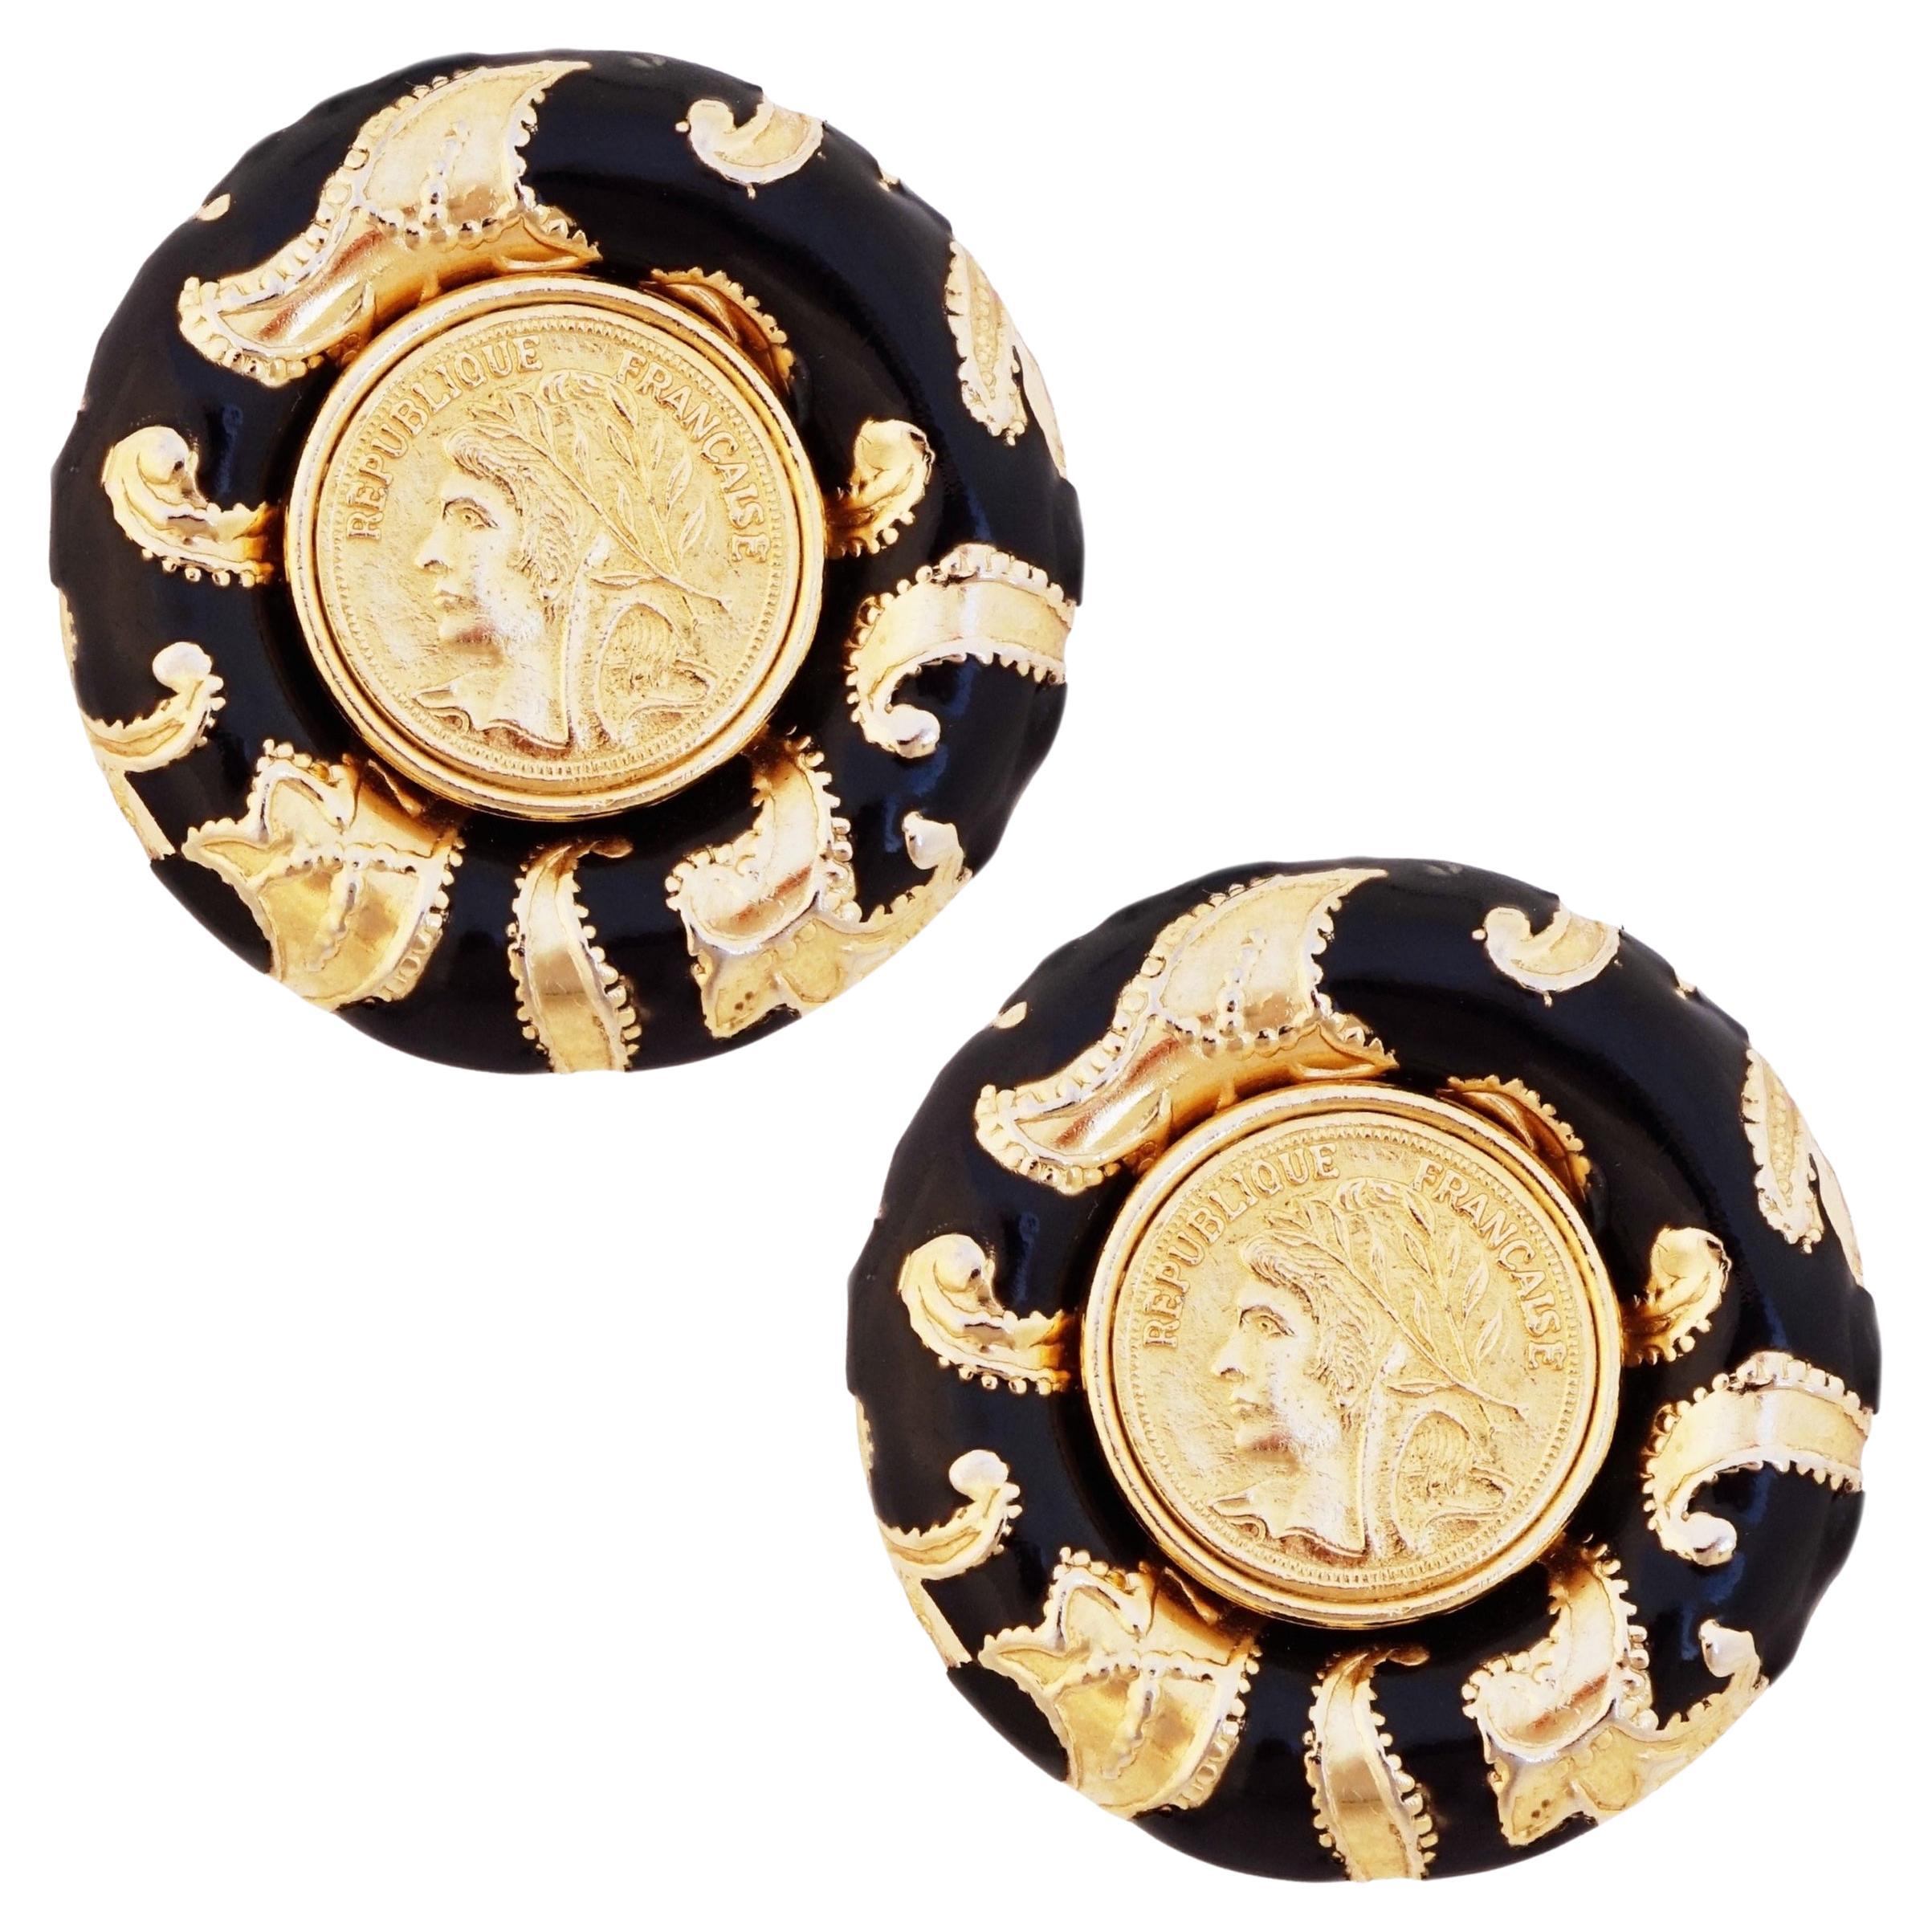 Massive Black Enamel Baroque Earrings With French Coins By RJ Graziano, 1980s For Sale